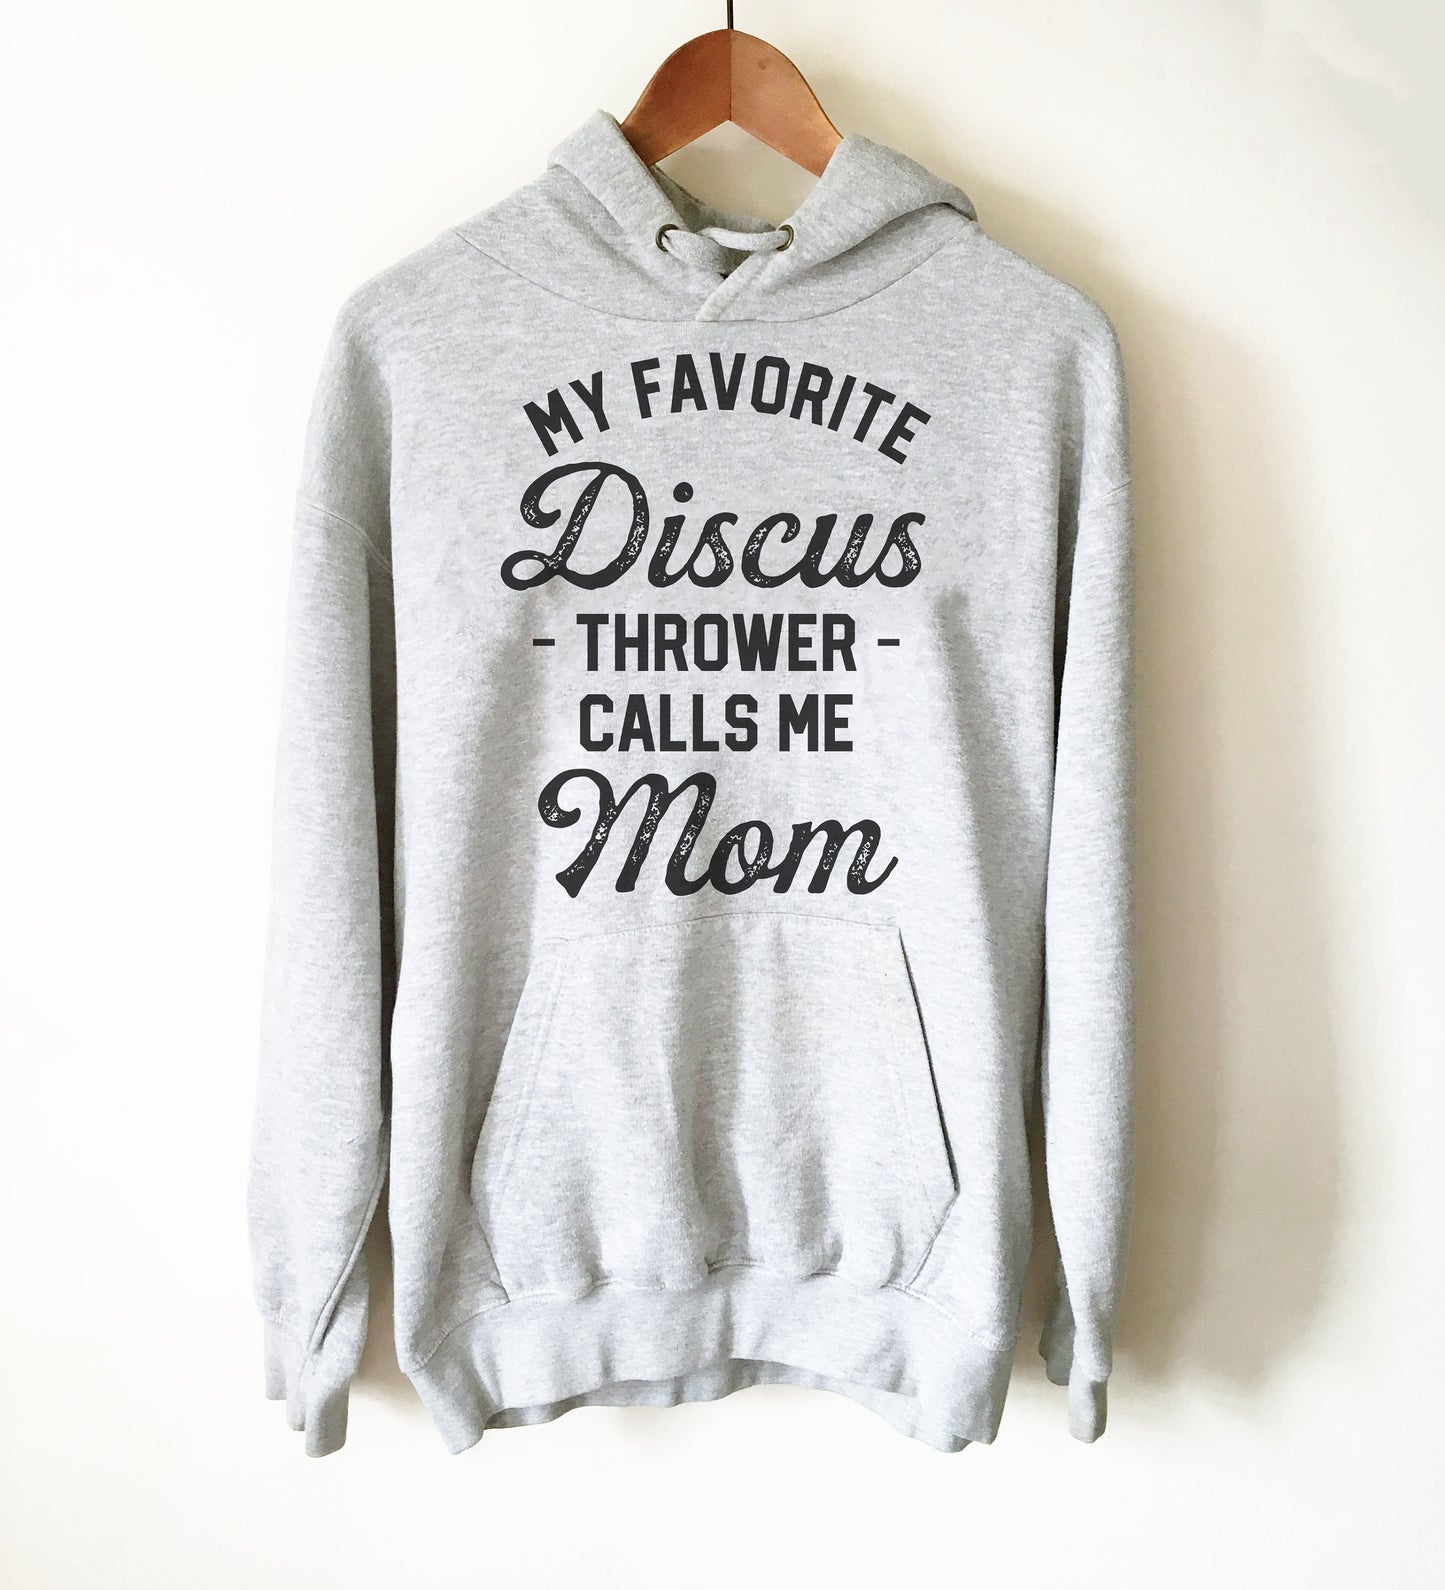 My Favorite Discus Thrower Calls Me Mom Hoodie - Discus Shirt, Discus Gift, Discus Thrower, Track and Field, Discus Throw, Sports Mom Shirt